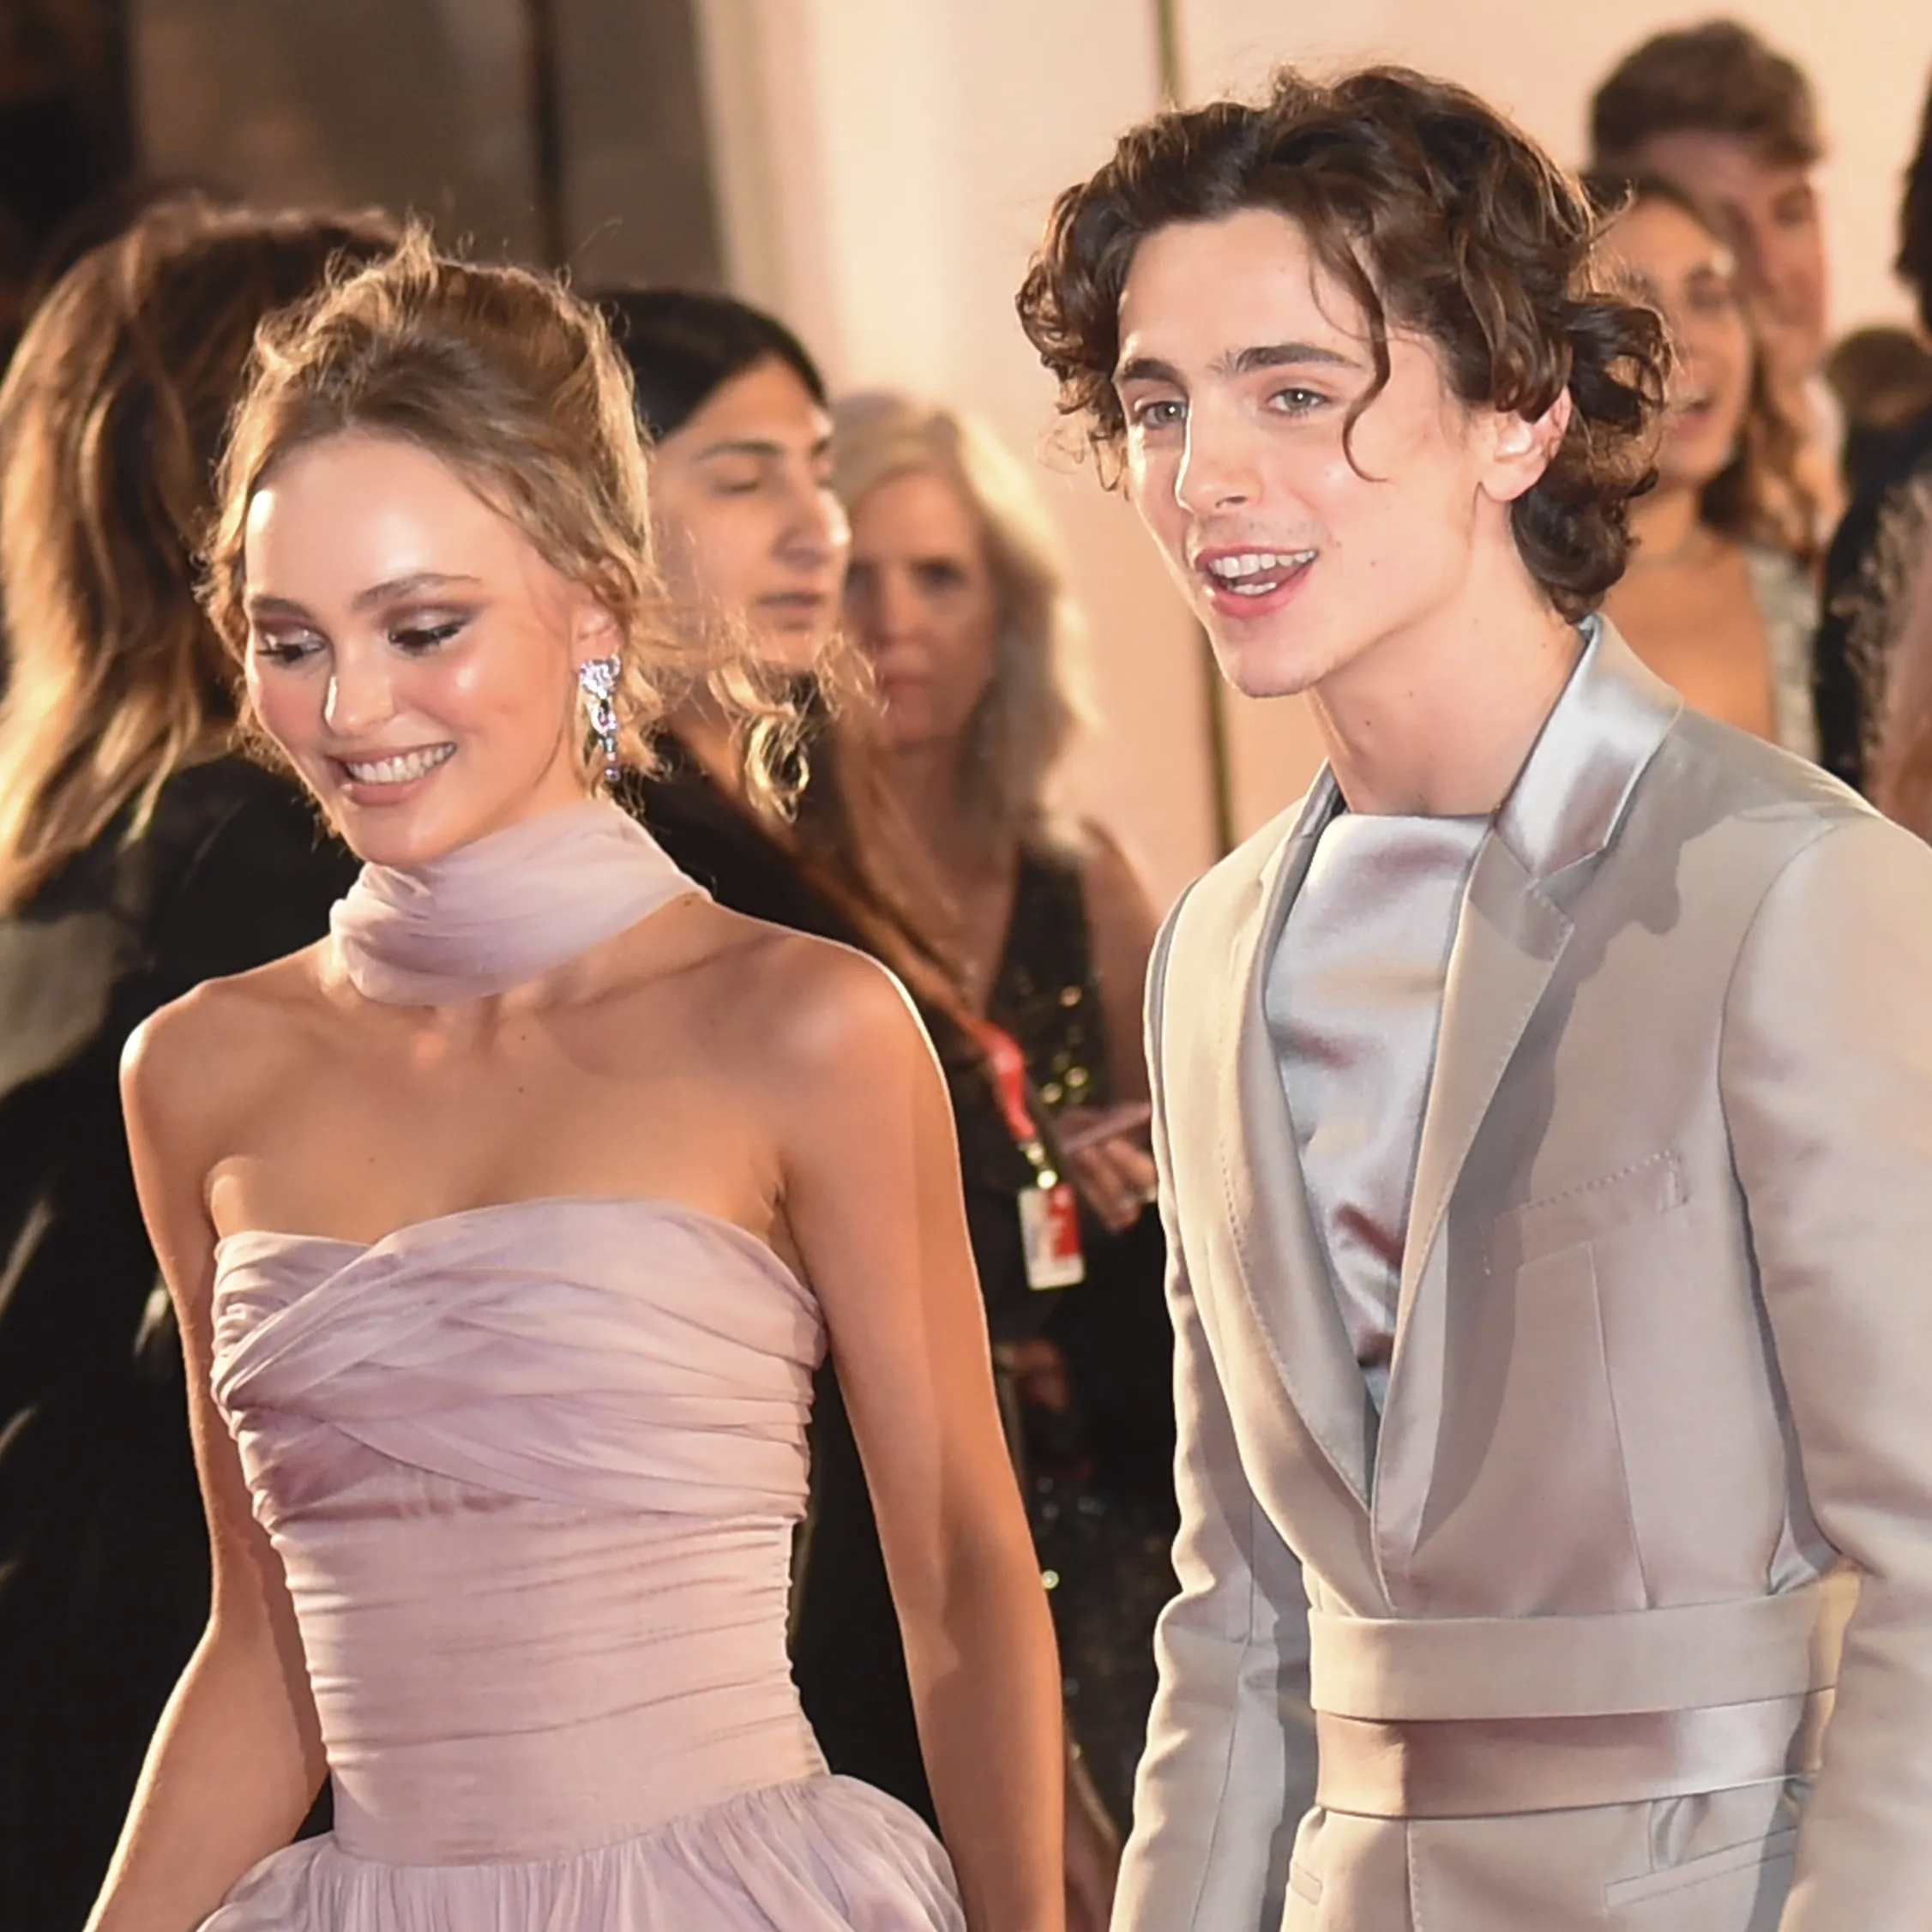 Timothee and Lily